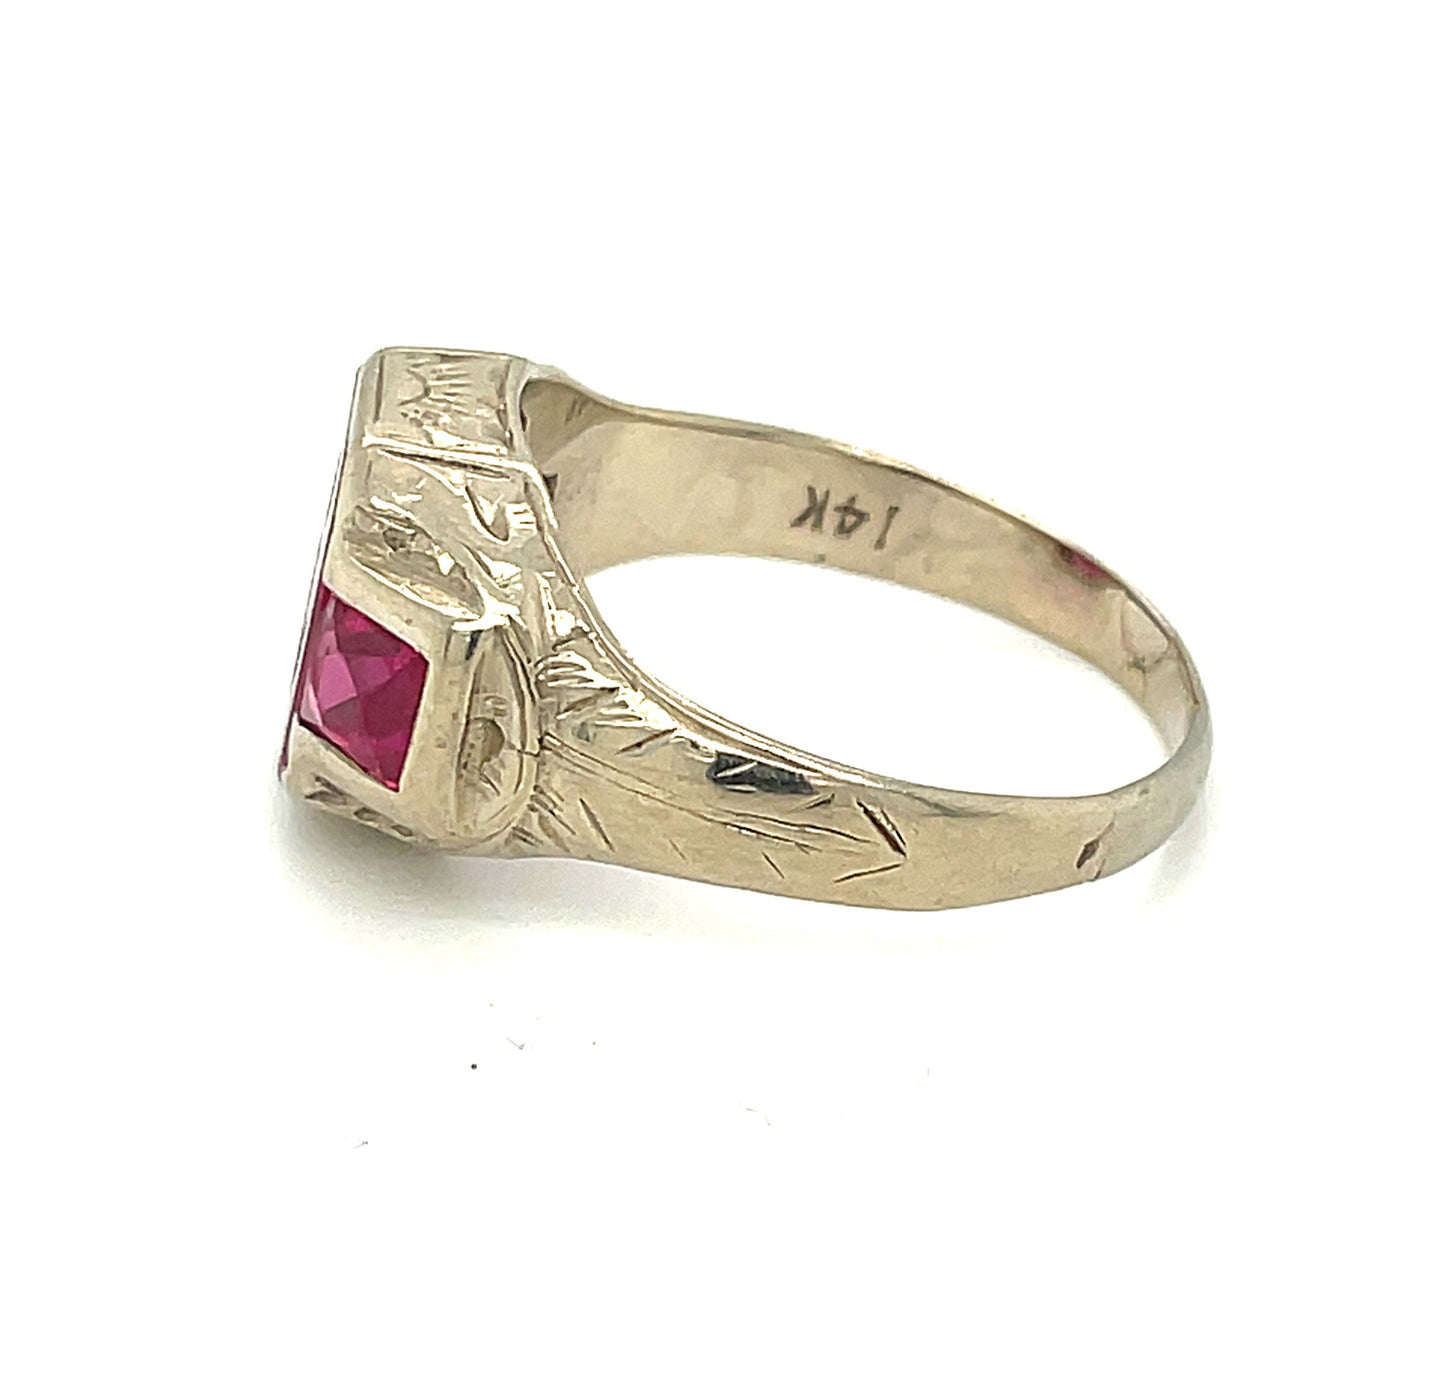 Vintage 14k Yellow Gold Masonic Ring Synthetic Rubies 6.08g Size 9.75